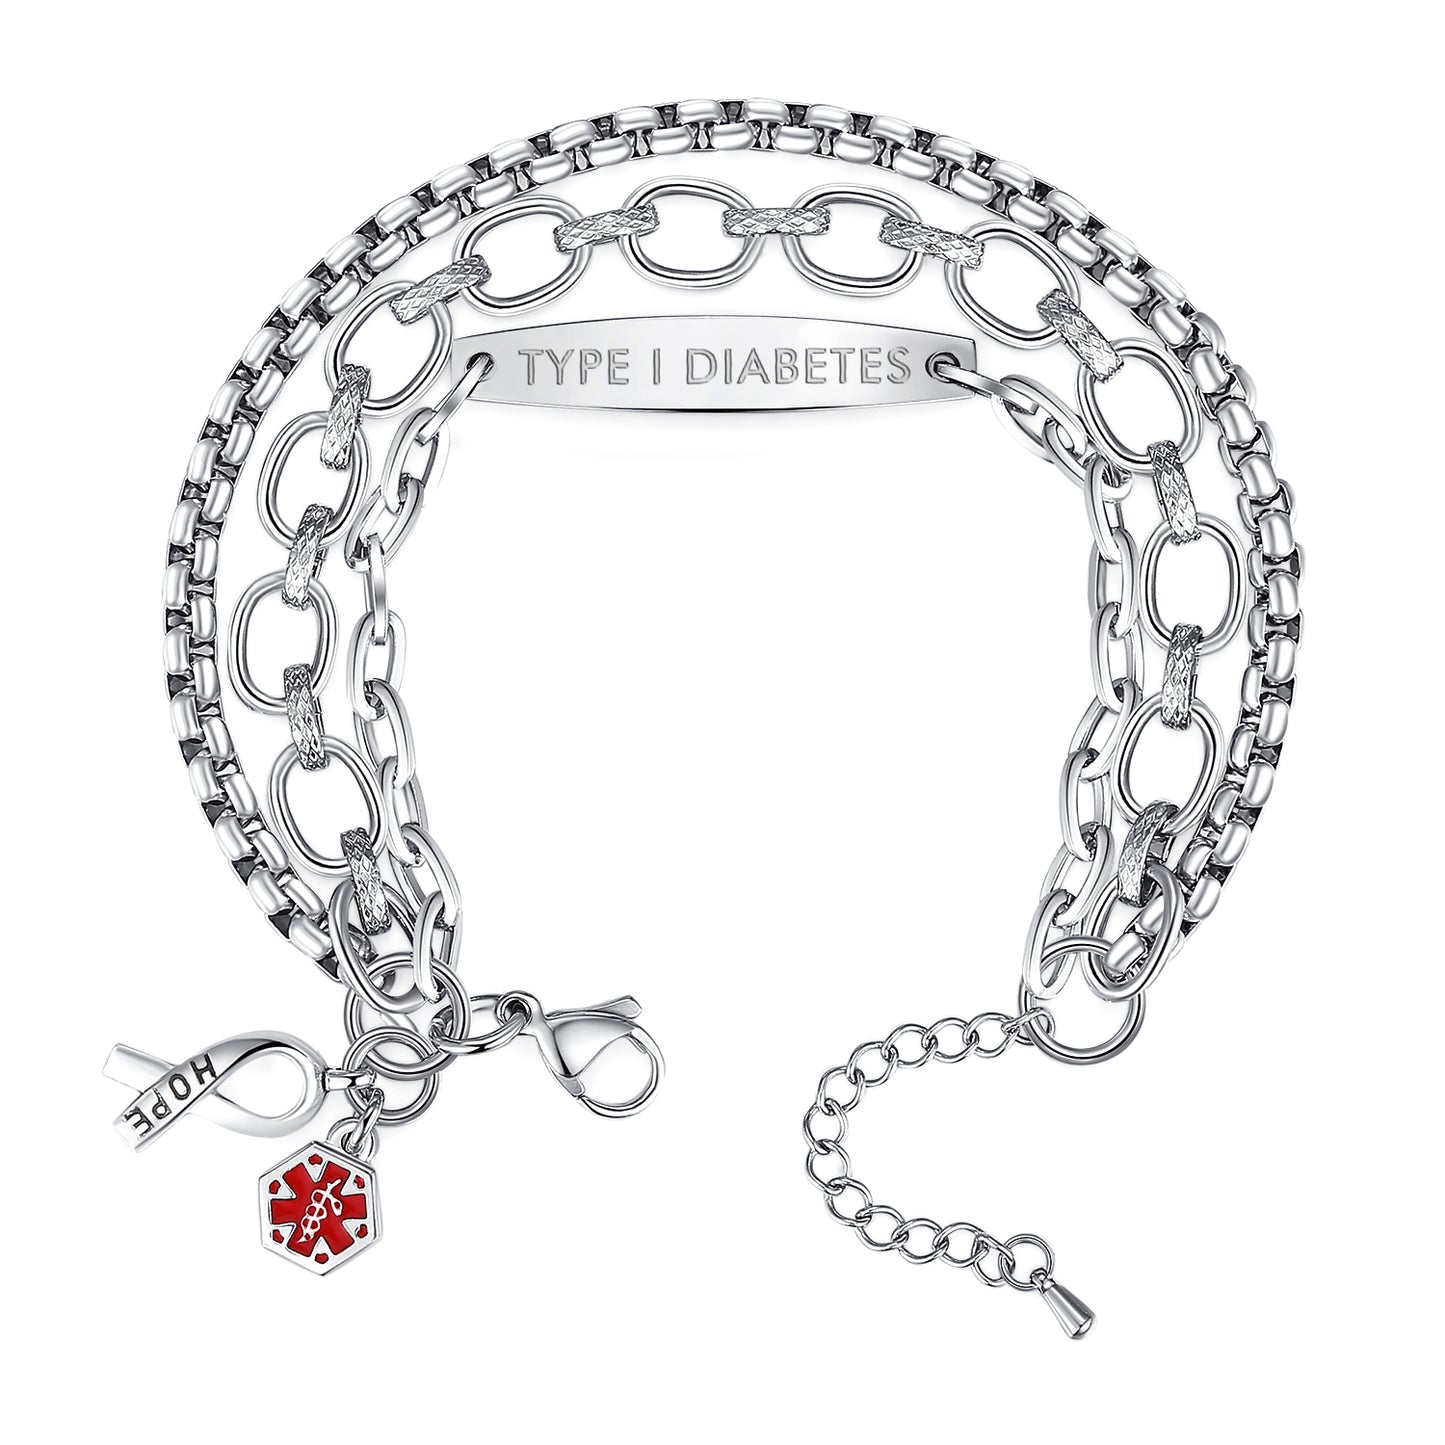 linnalove Distinctive design and fashionable wrap multi-chain medical alert bracelets for women with hope ribbons and medical id charm